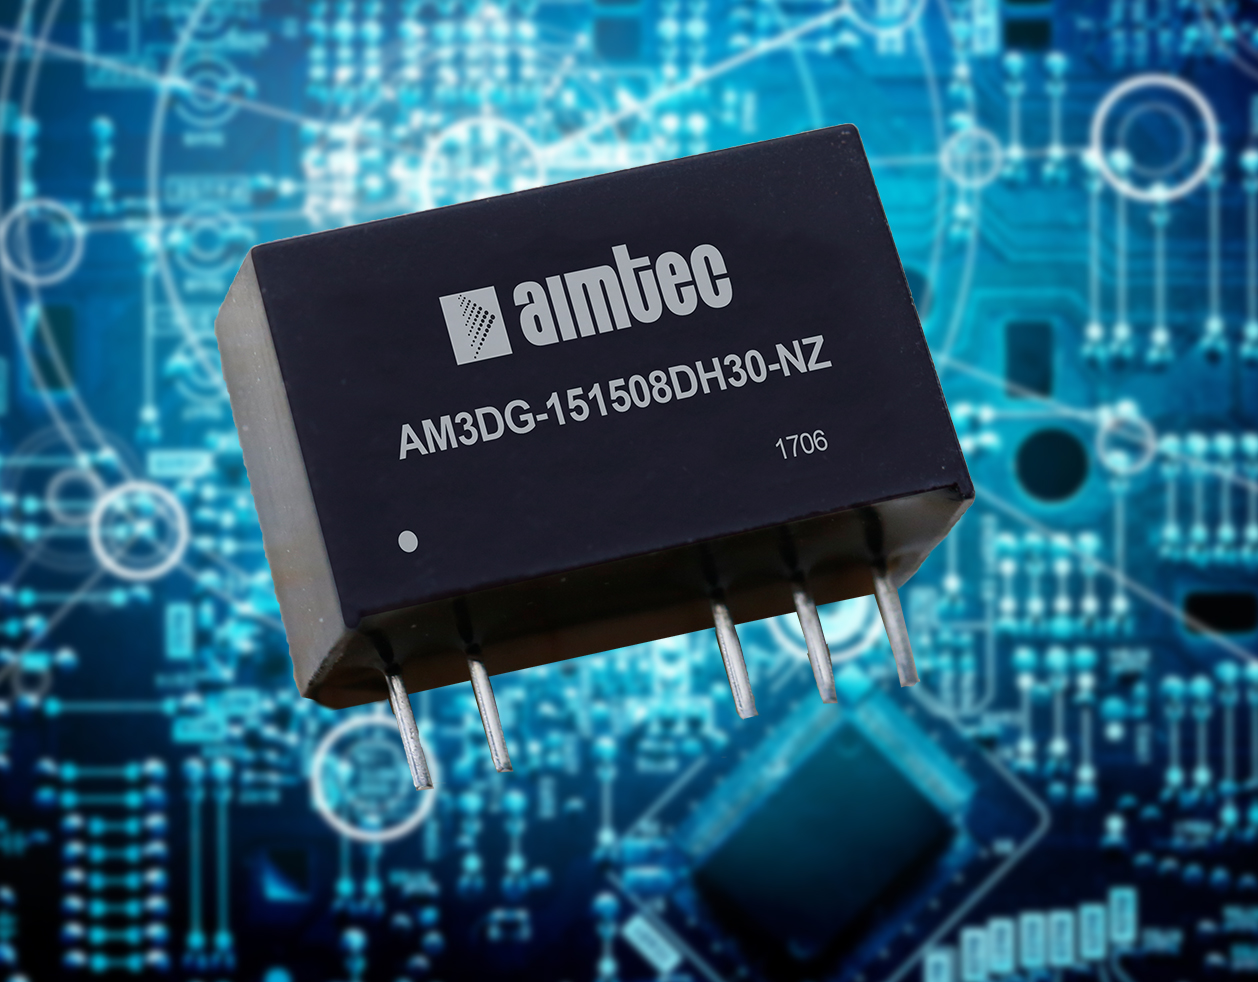 Aimtec Adds 3 & 5W DC/DC Converters to its Lineup